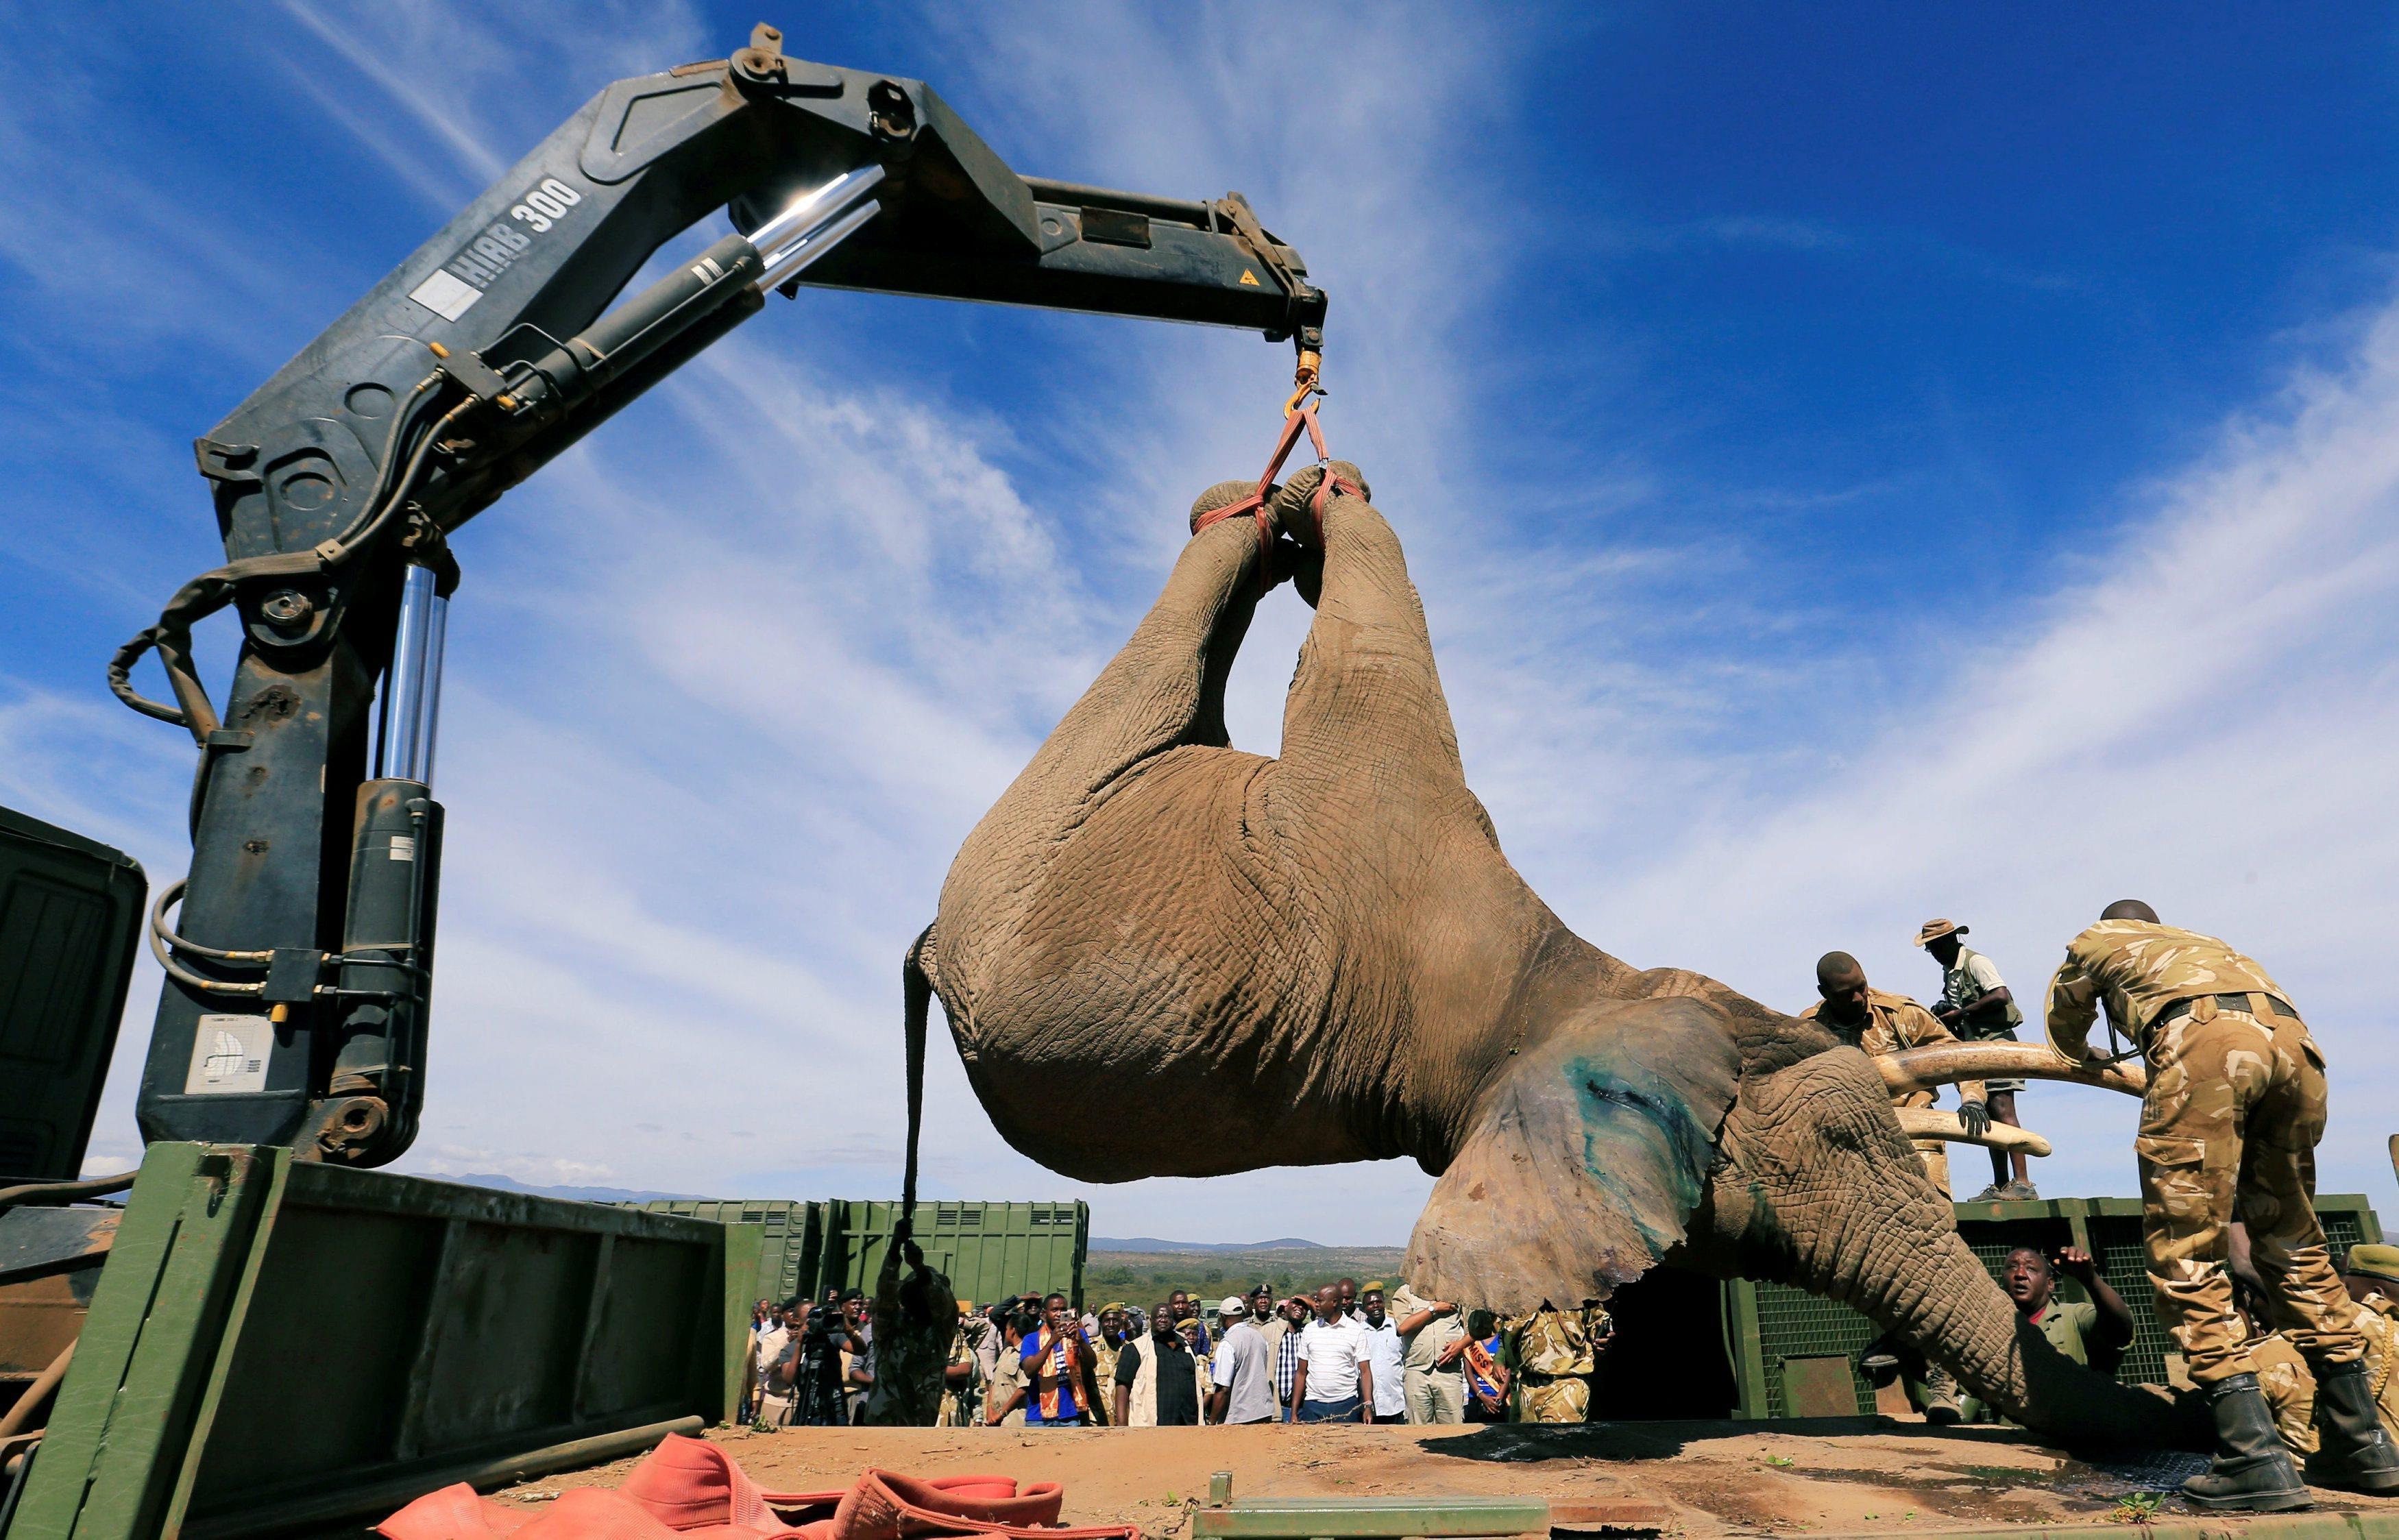 Kenya Wildlife Service rangers load a tranquillised elephant onto a truck during a translocation exe